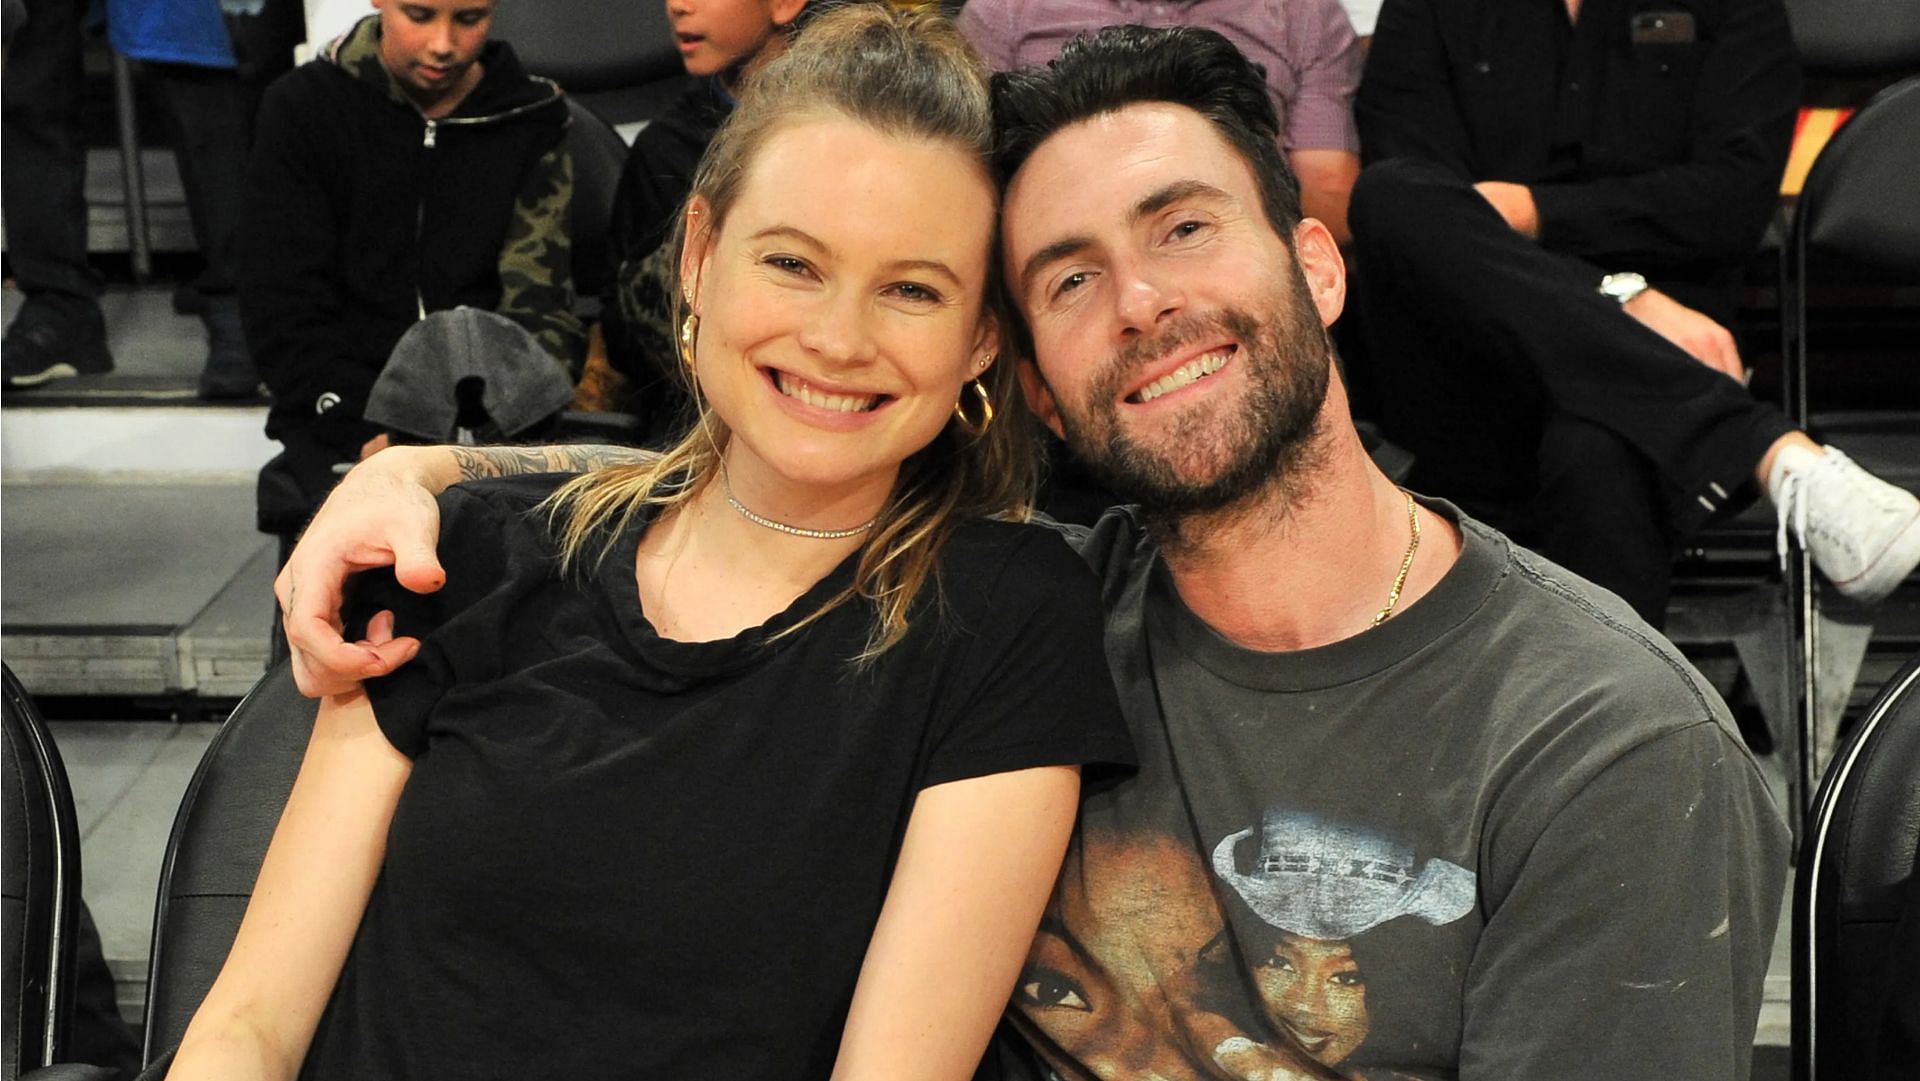 Behati Prinsloo and Adam Levine are already parents to two daughters. (Photo by Allen Berezovsky/Getty Images)